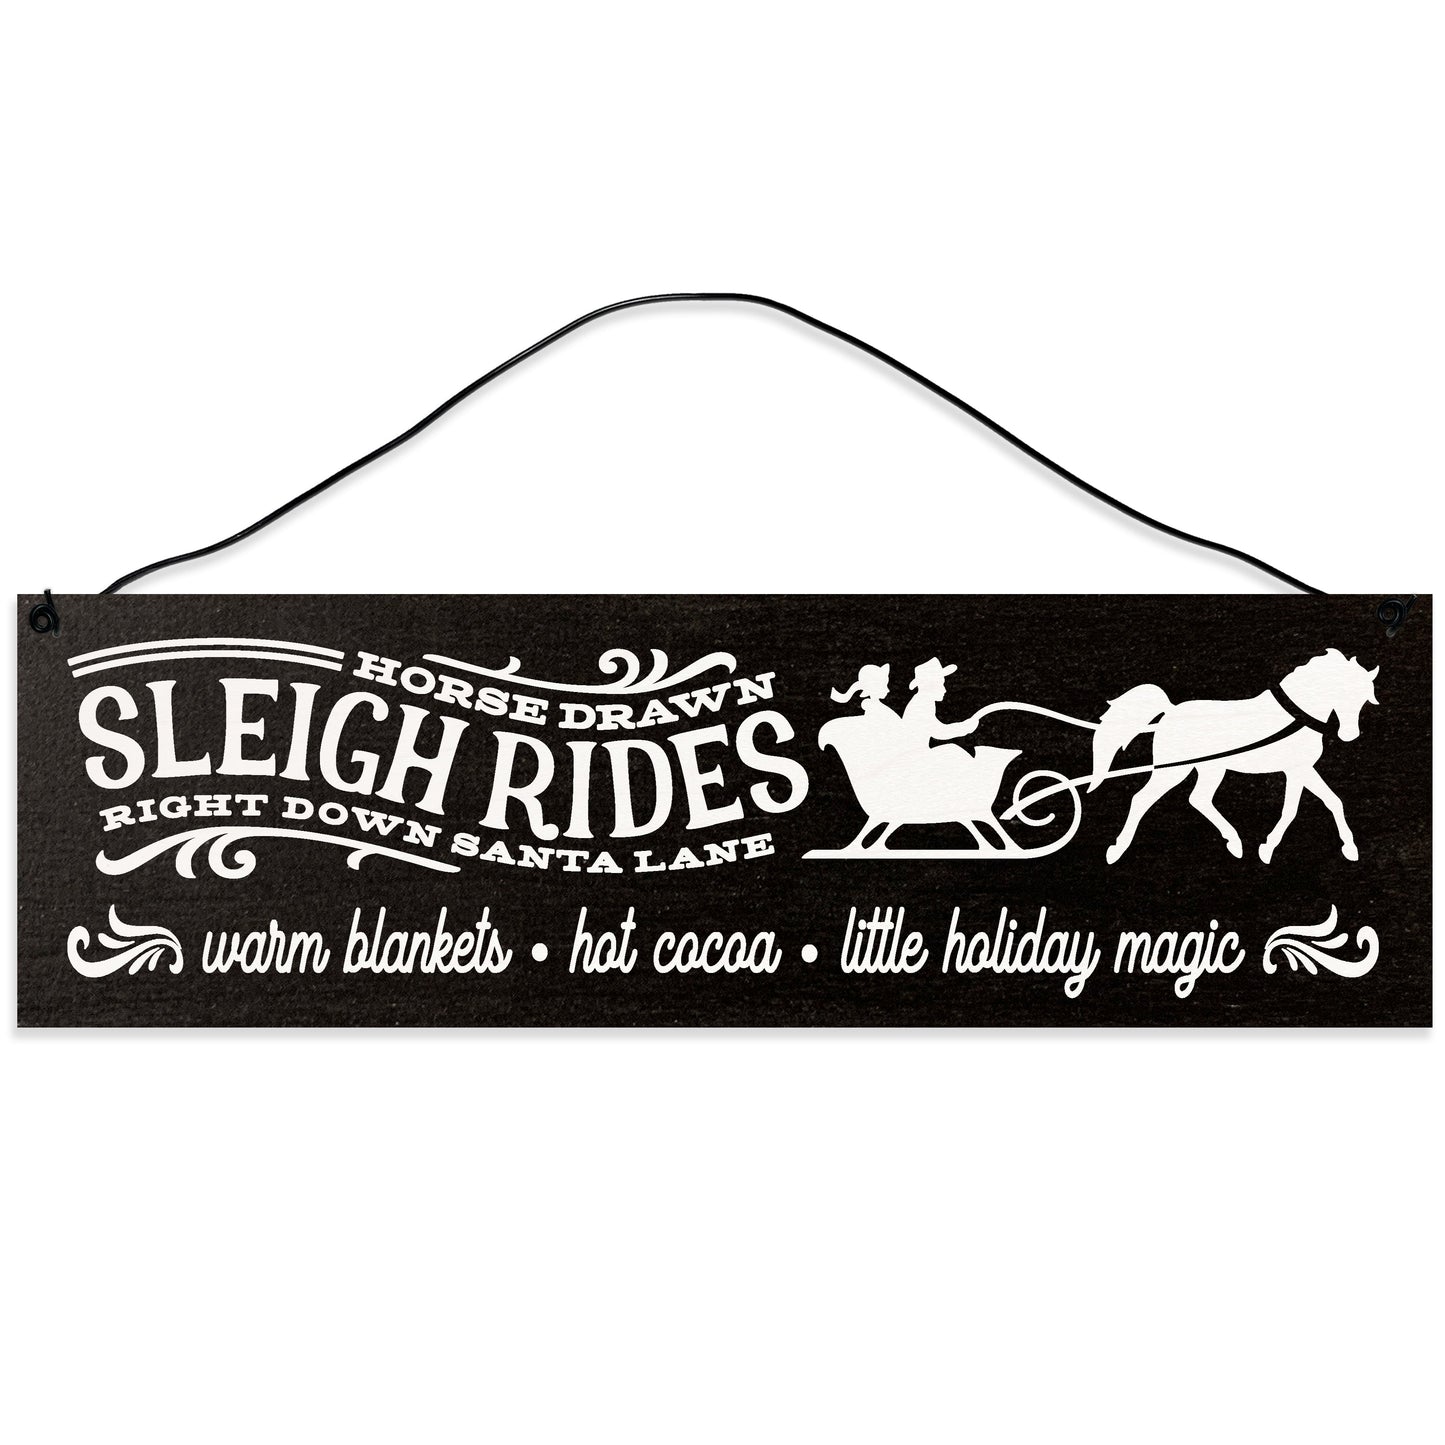 Sawyer's Mill - Horse Drawn Sleigh Rides. Wood Sign for Home or Office. Measures 3x10 inches.